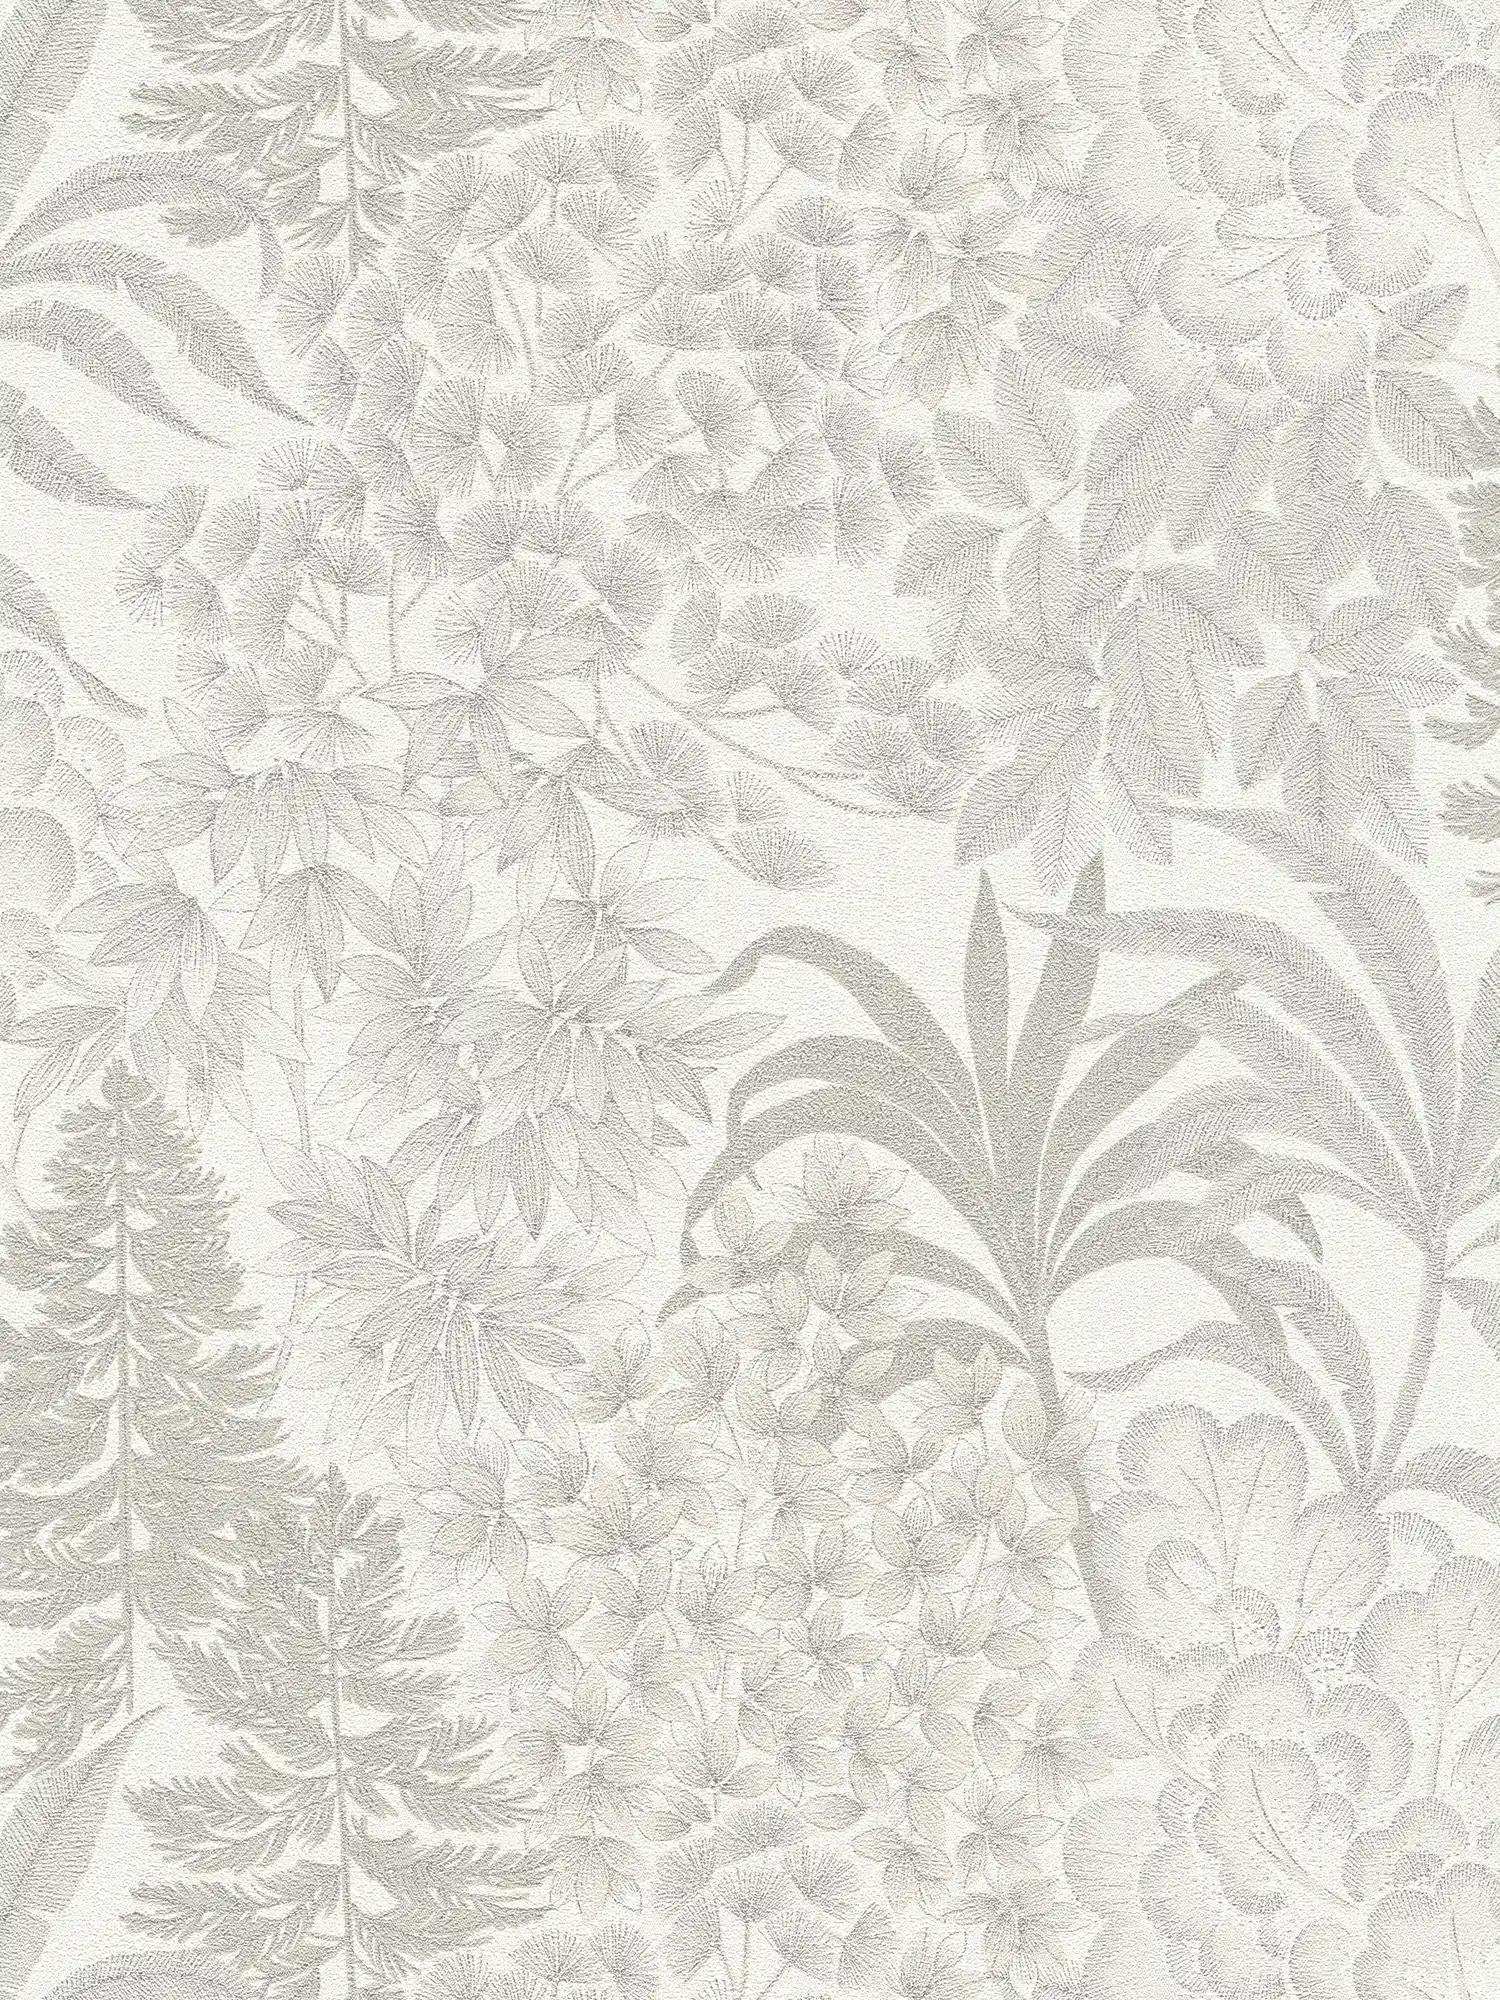 Slightly shiny floral wallpaper in a subtle colour - white, grey, silver
